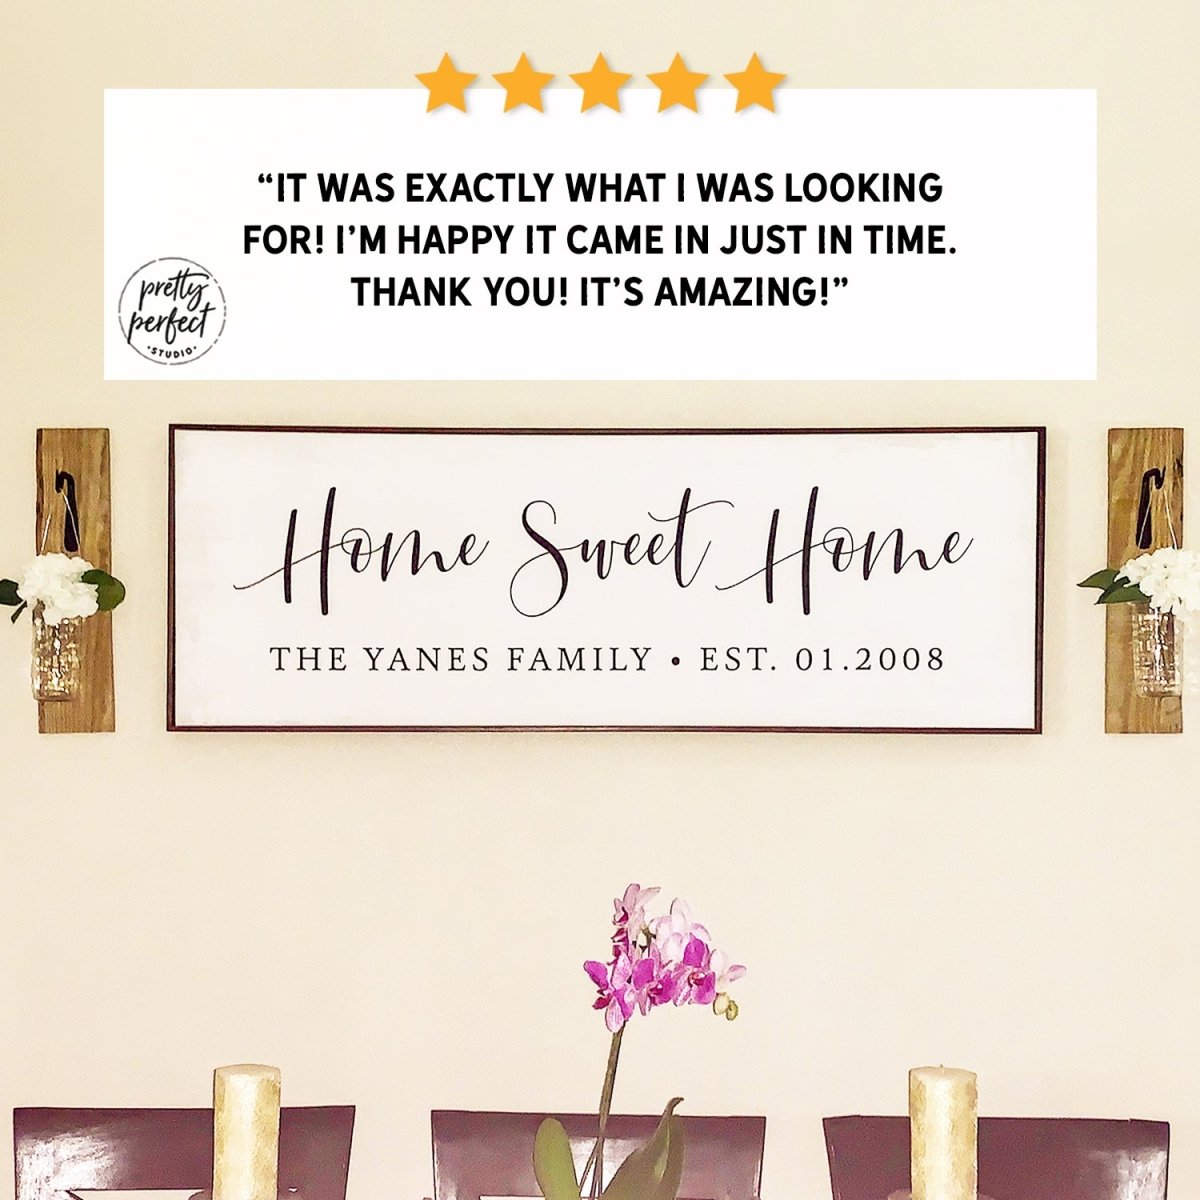 Customer product review for personalized farmhouse sign by Pretty Perfect Studio